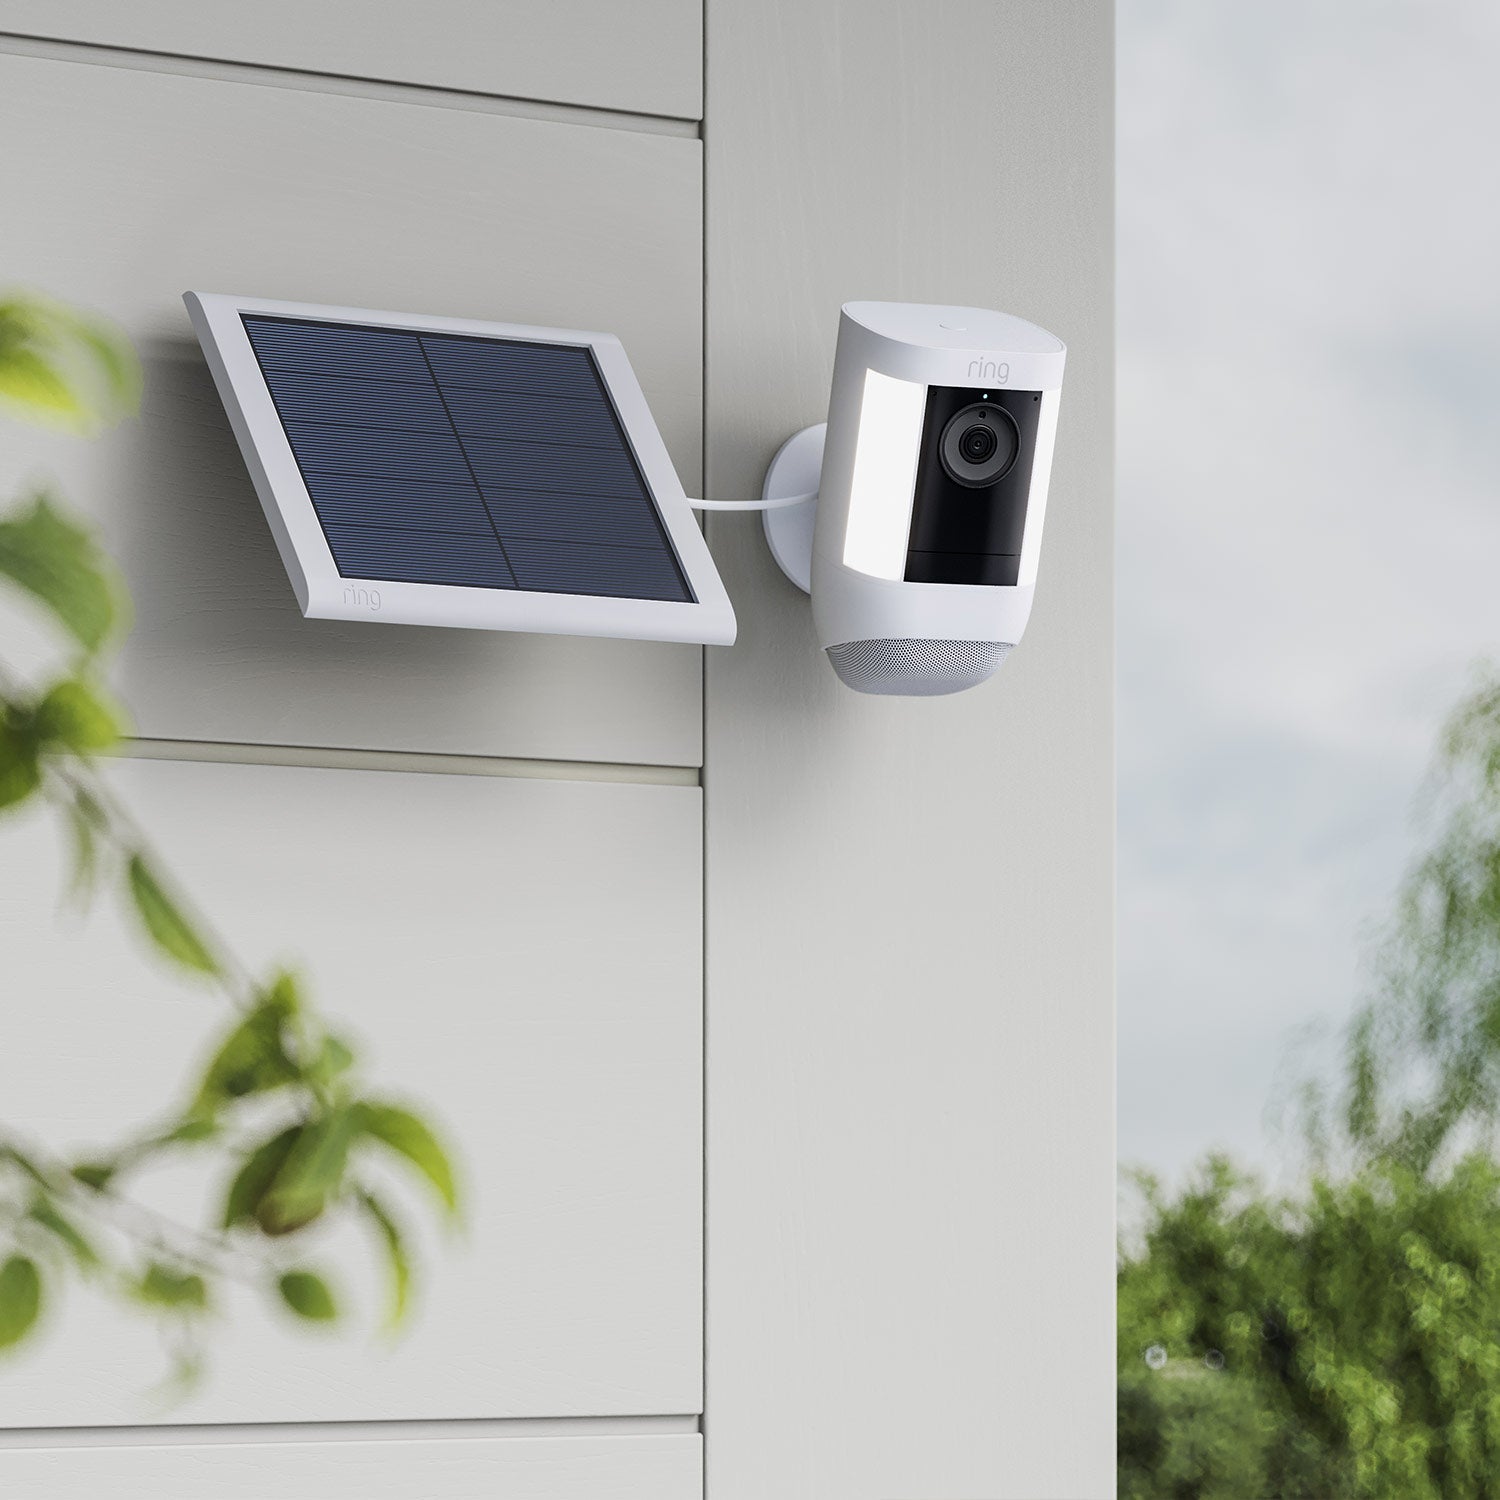 Spotlight Cam Pro (Solar) - Spotlight Cam Pro and solar panel, both in white, mounted on exterior wall of home.